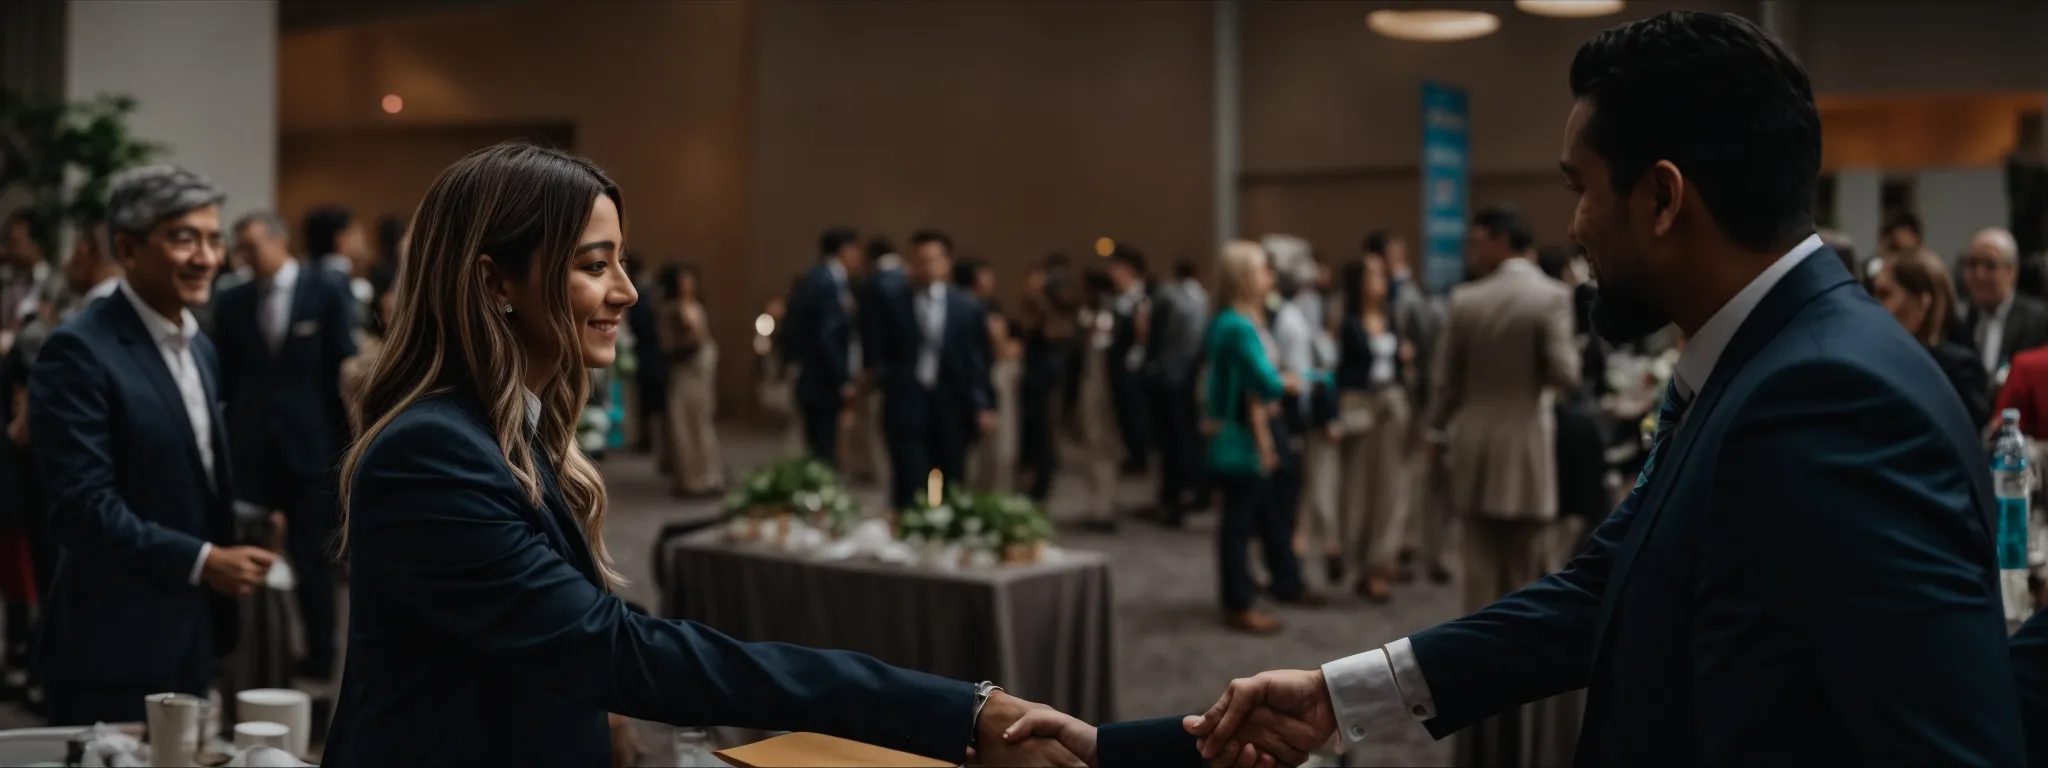 a person shaking hands with a new client at a bustling industry event.